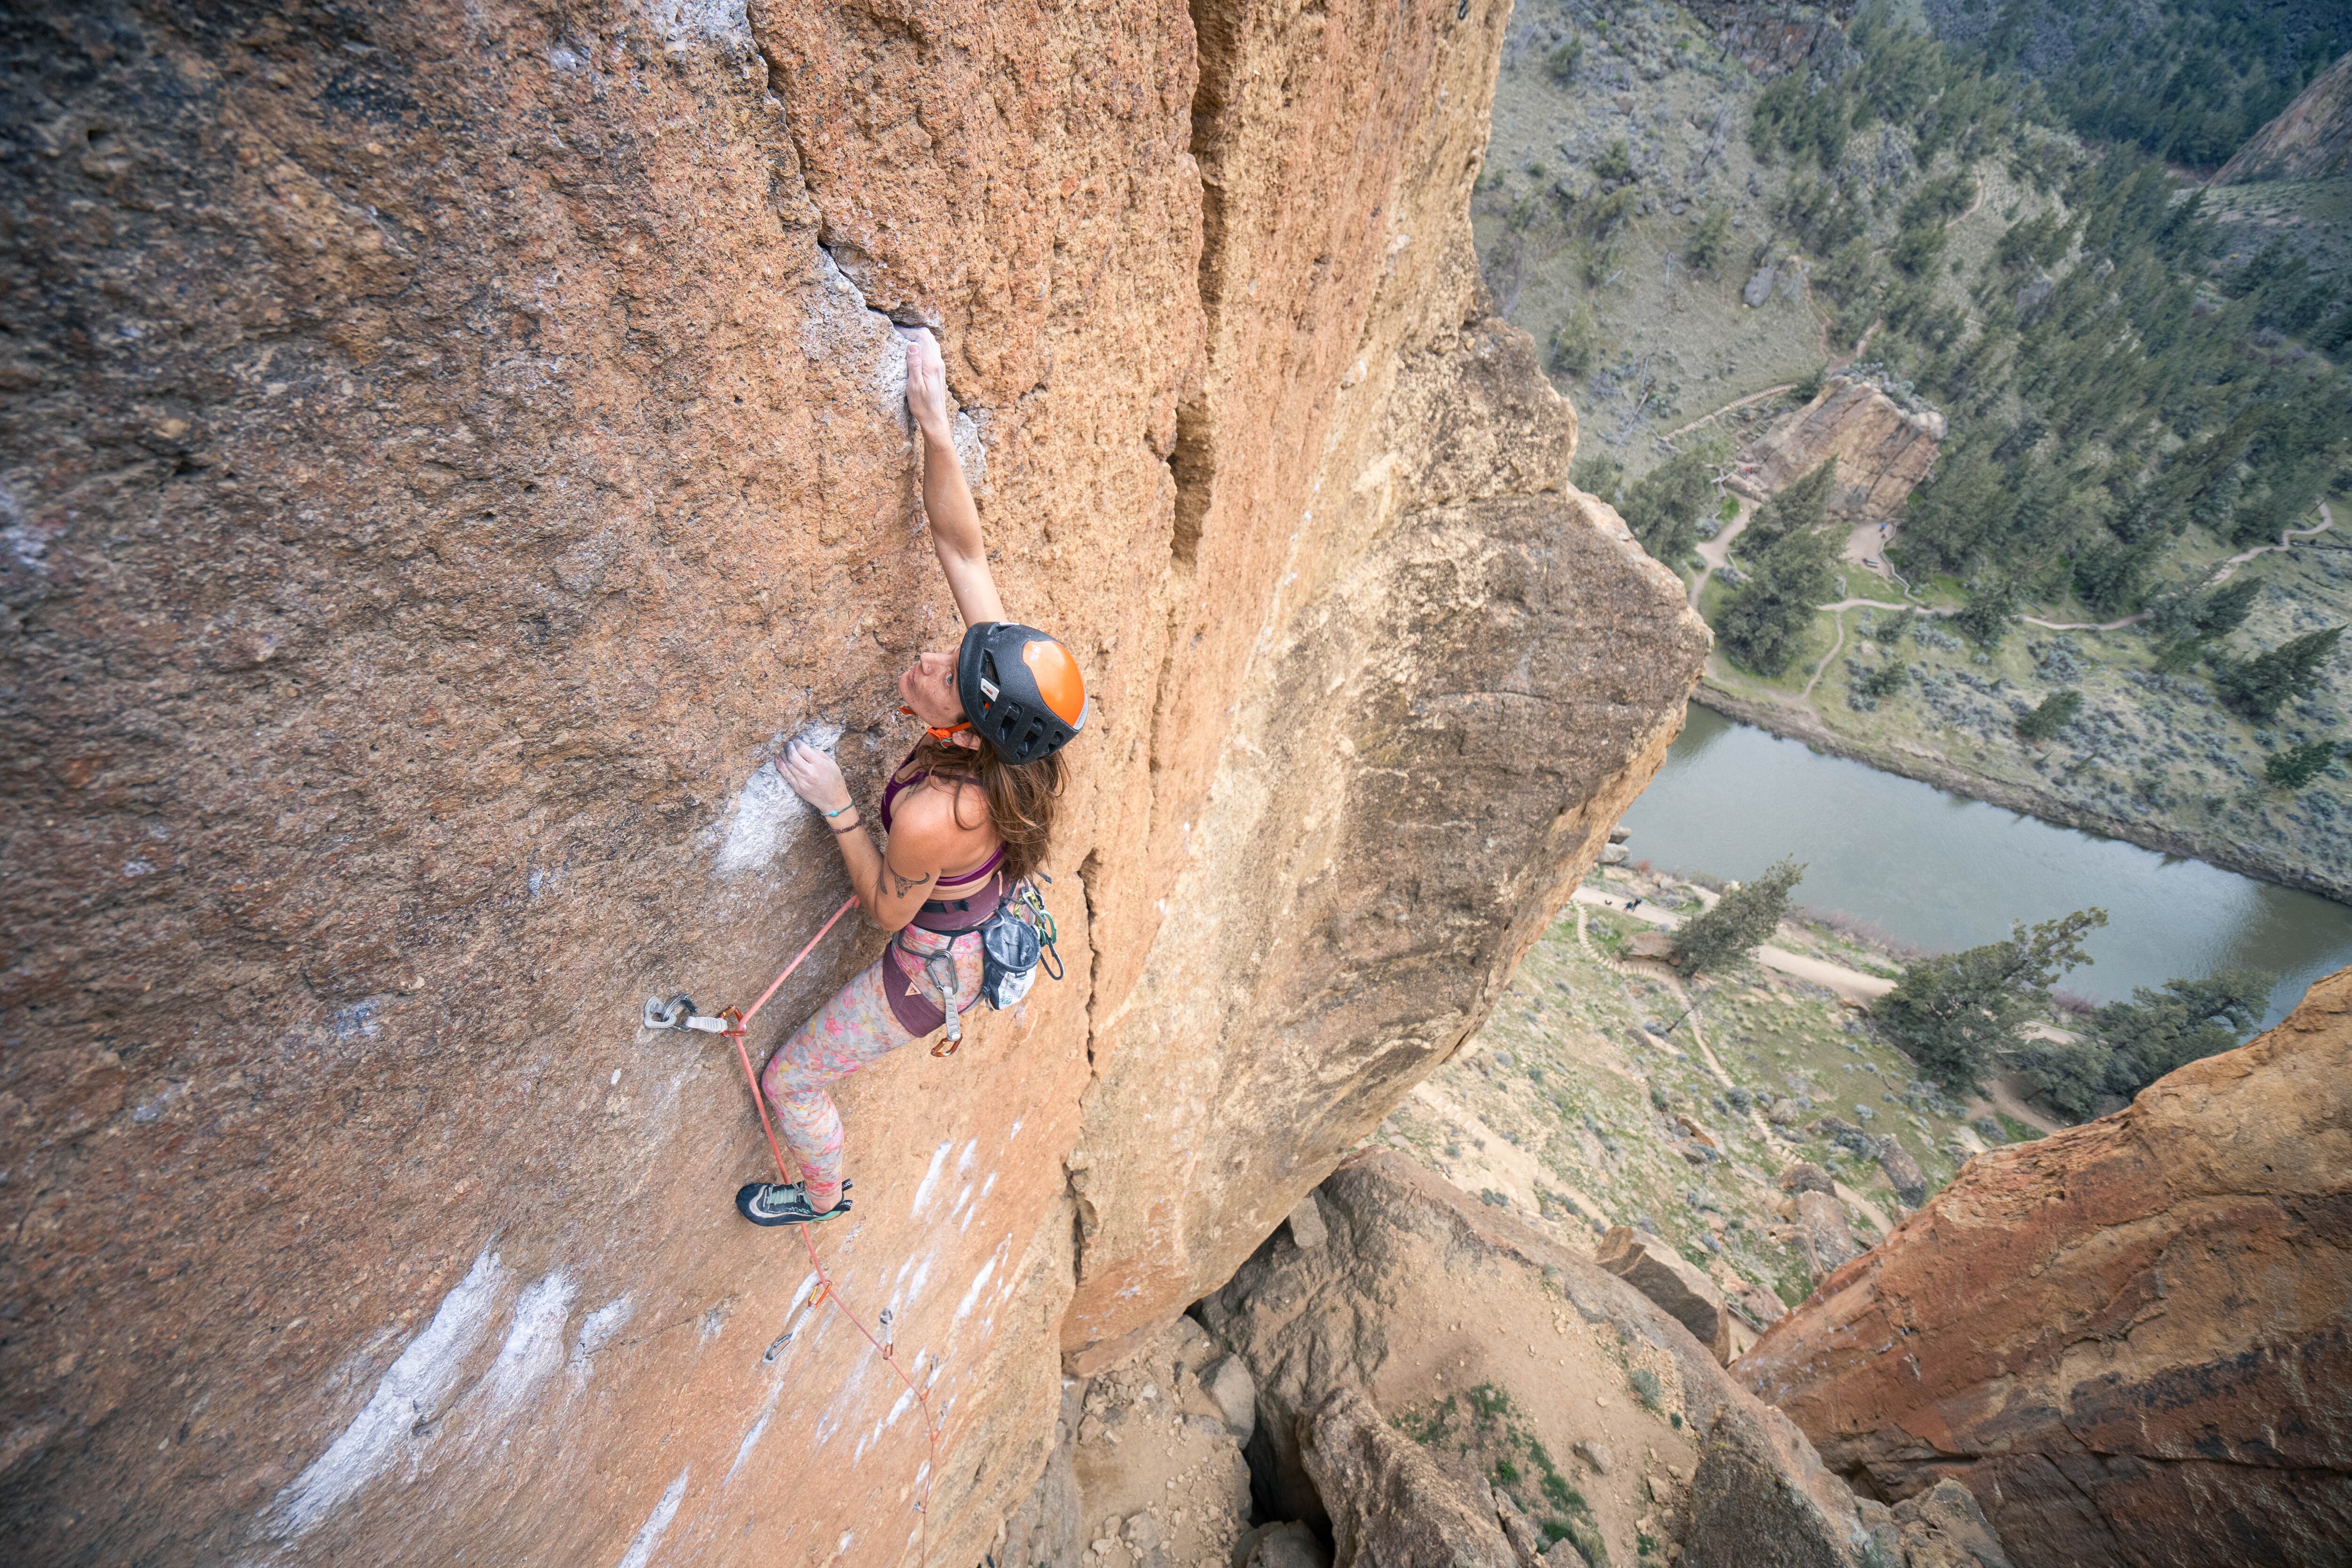 Jess Moran is a climber and one of the athletes featured in the 